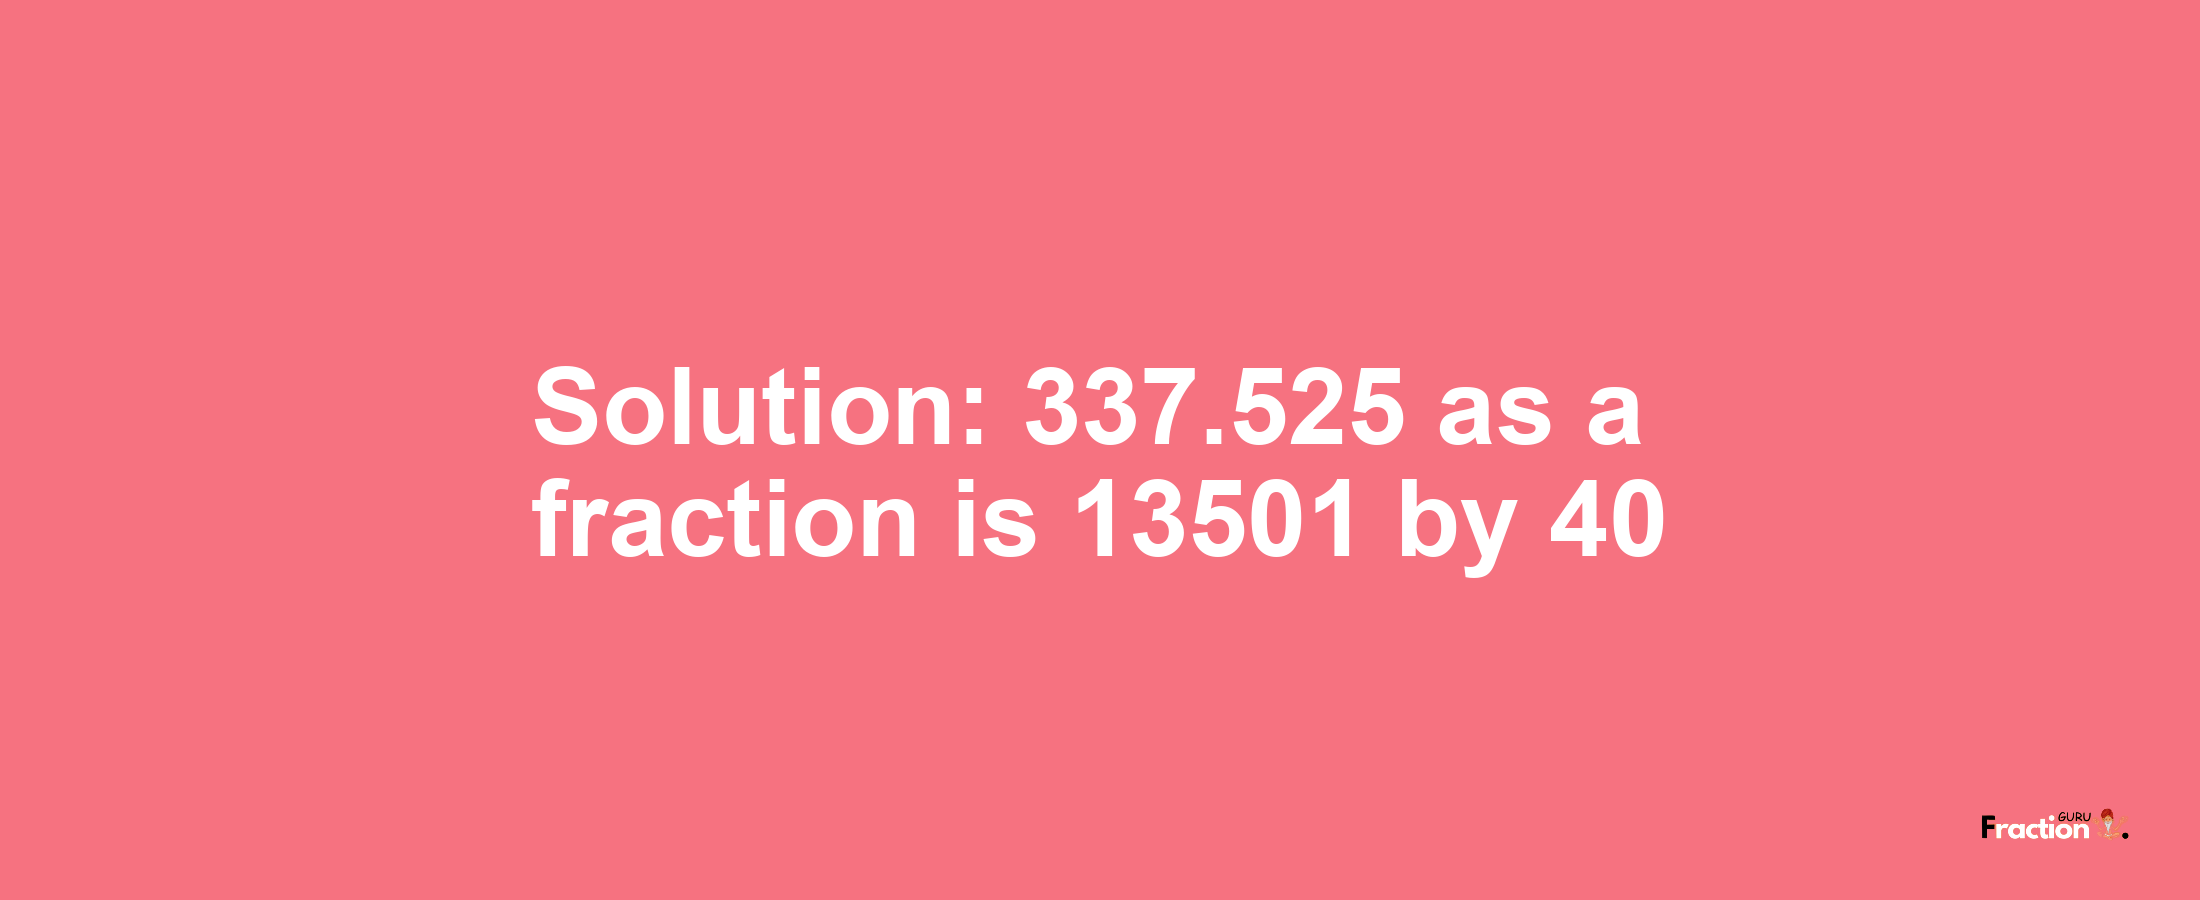 Solution:337.525 as a fraction is 13501/40